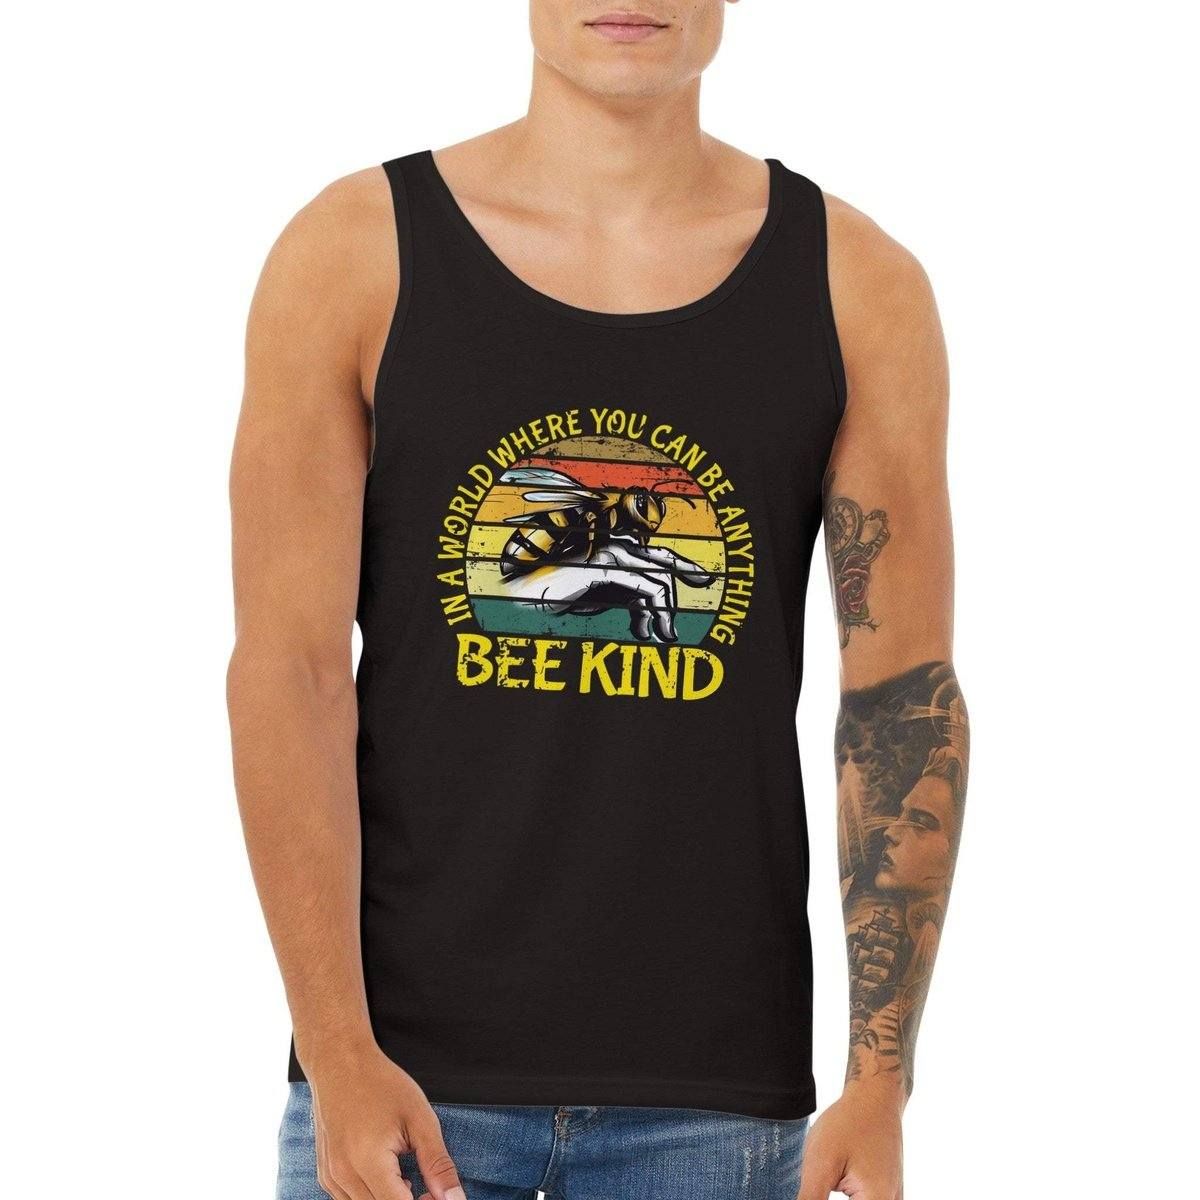 In a world where you can be anything bee kind Tank Top - Retro Vintage Bee - Premium Unisex Tank Top Australia Online Color